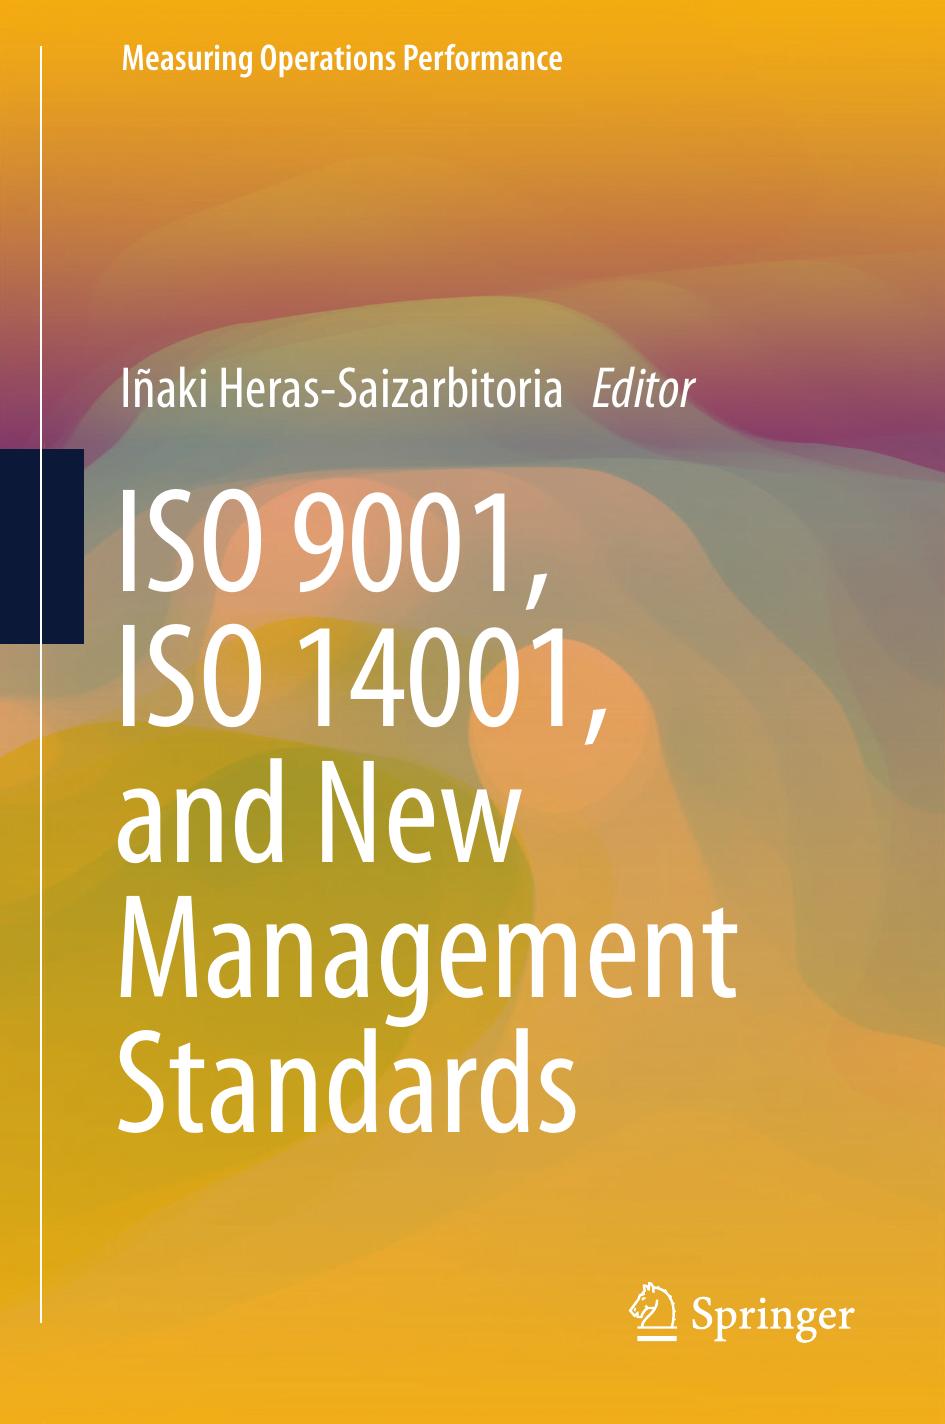 ISO 9001, ISO 14001, and New Management Standards ( PDFDrive ) 2018